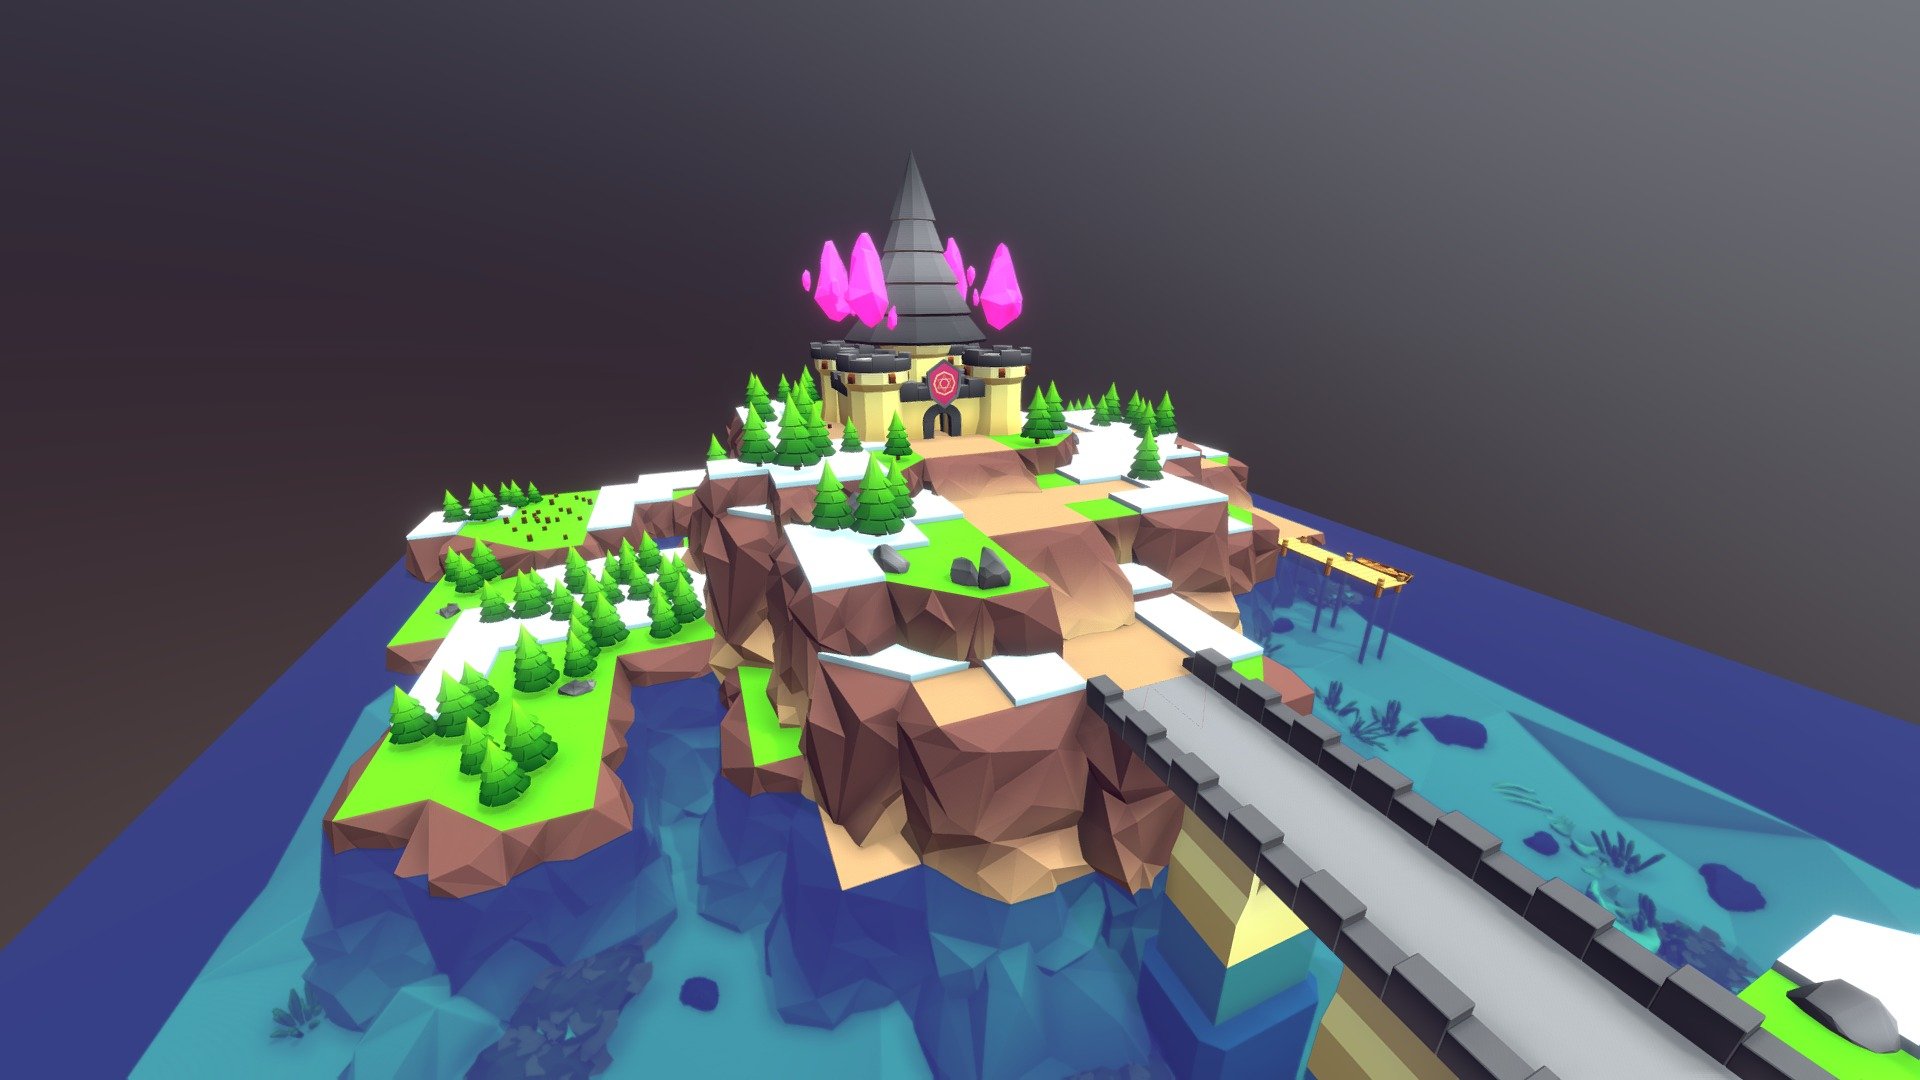 Low poly scene created with modular assets that i developed for a game jam 3d model